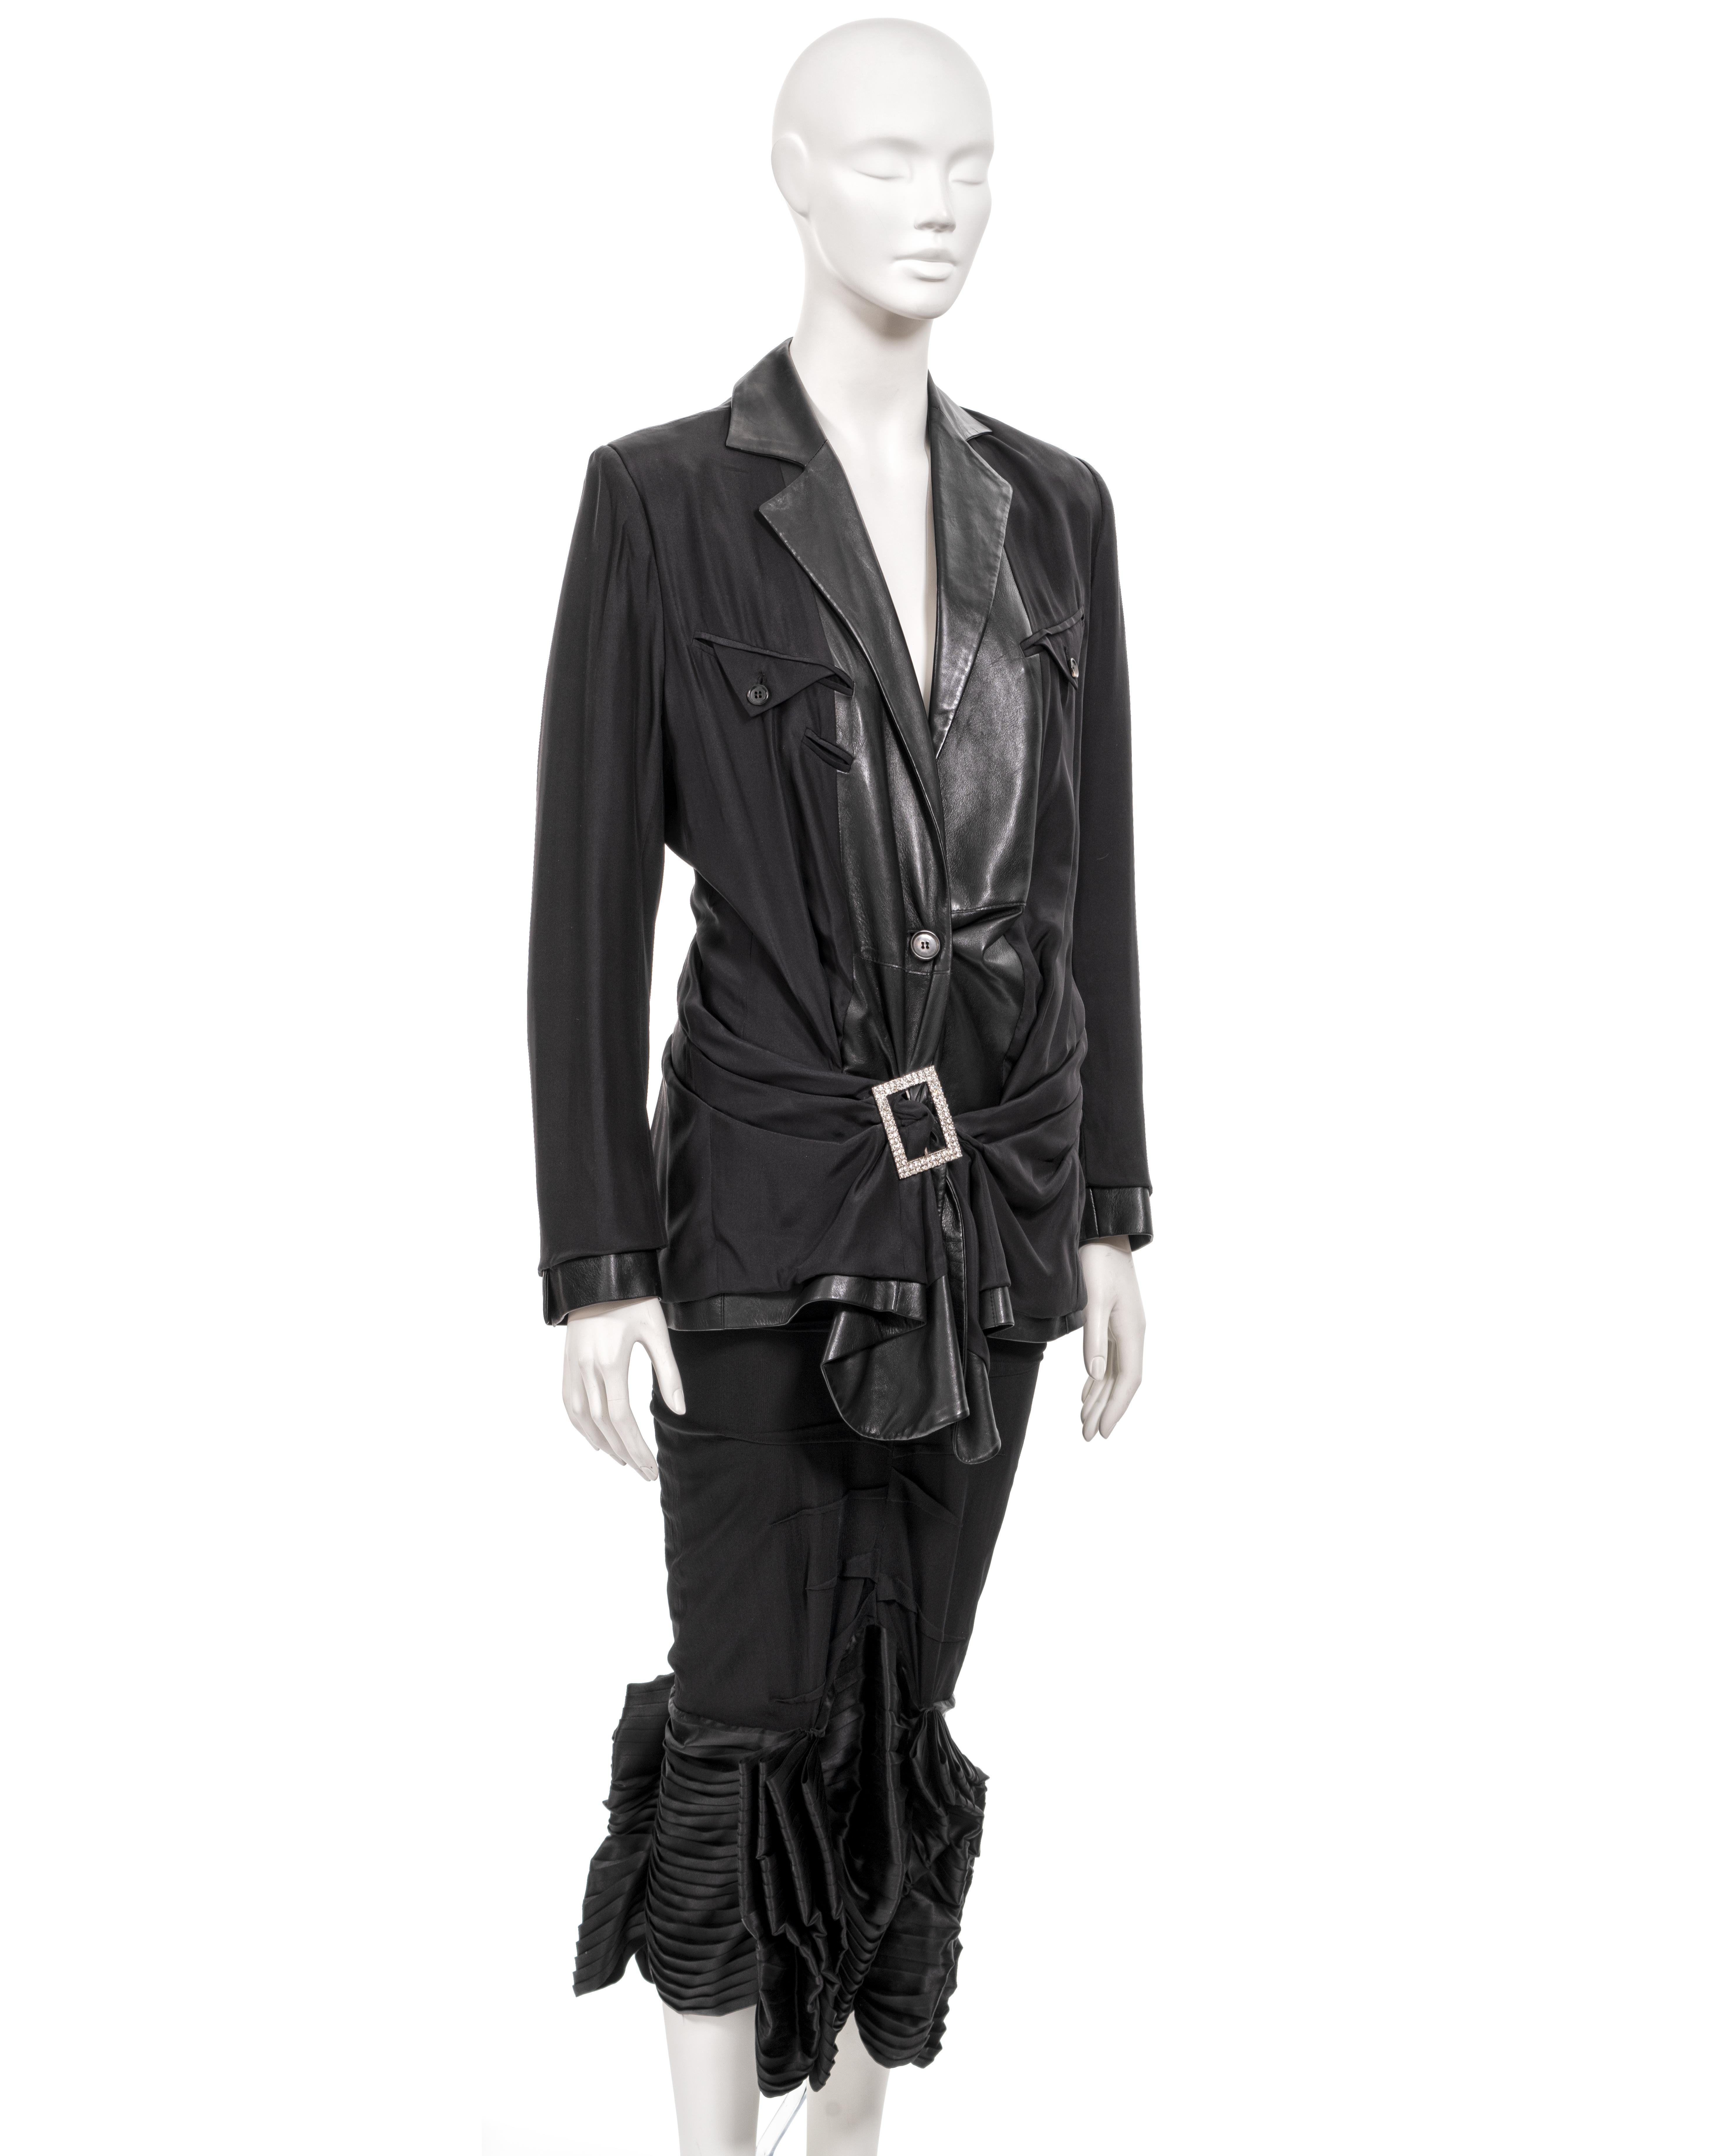 Christian Dior by John Galliano inside-out leather jacket and skirt set, ss 2003 For Sale 4